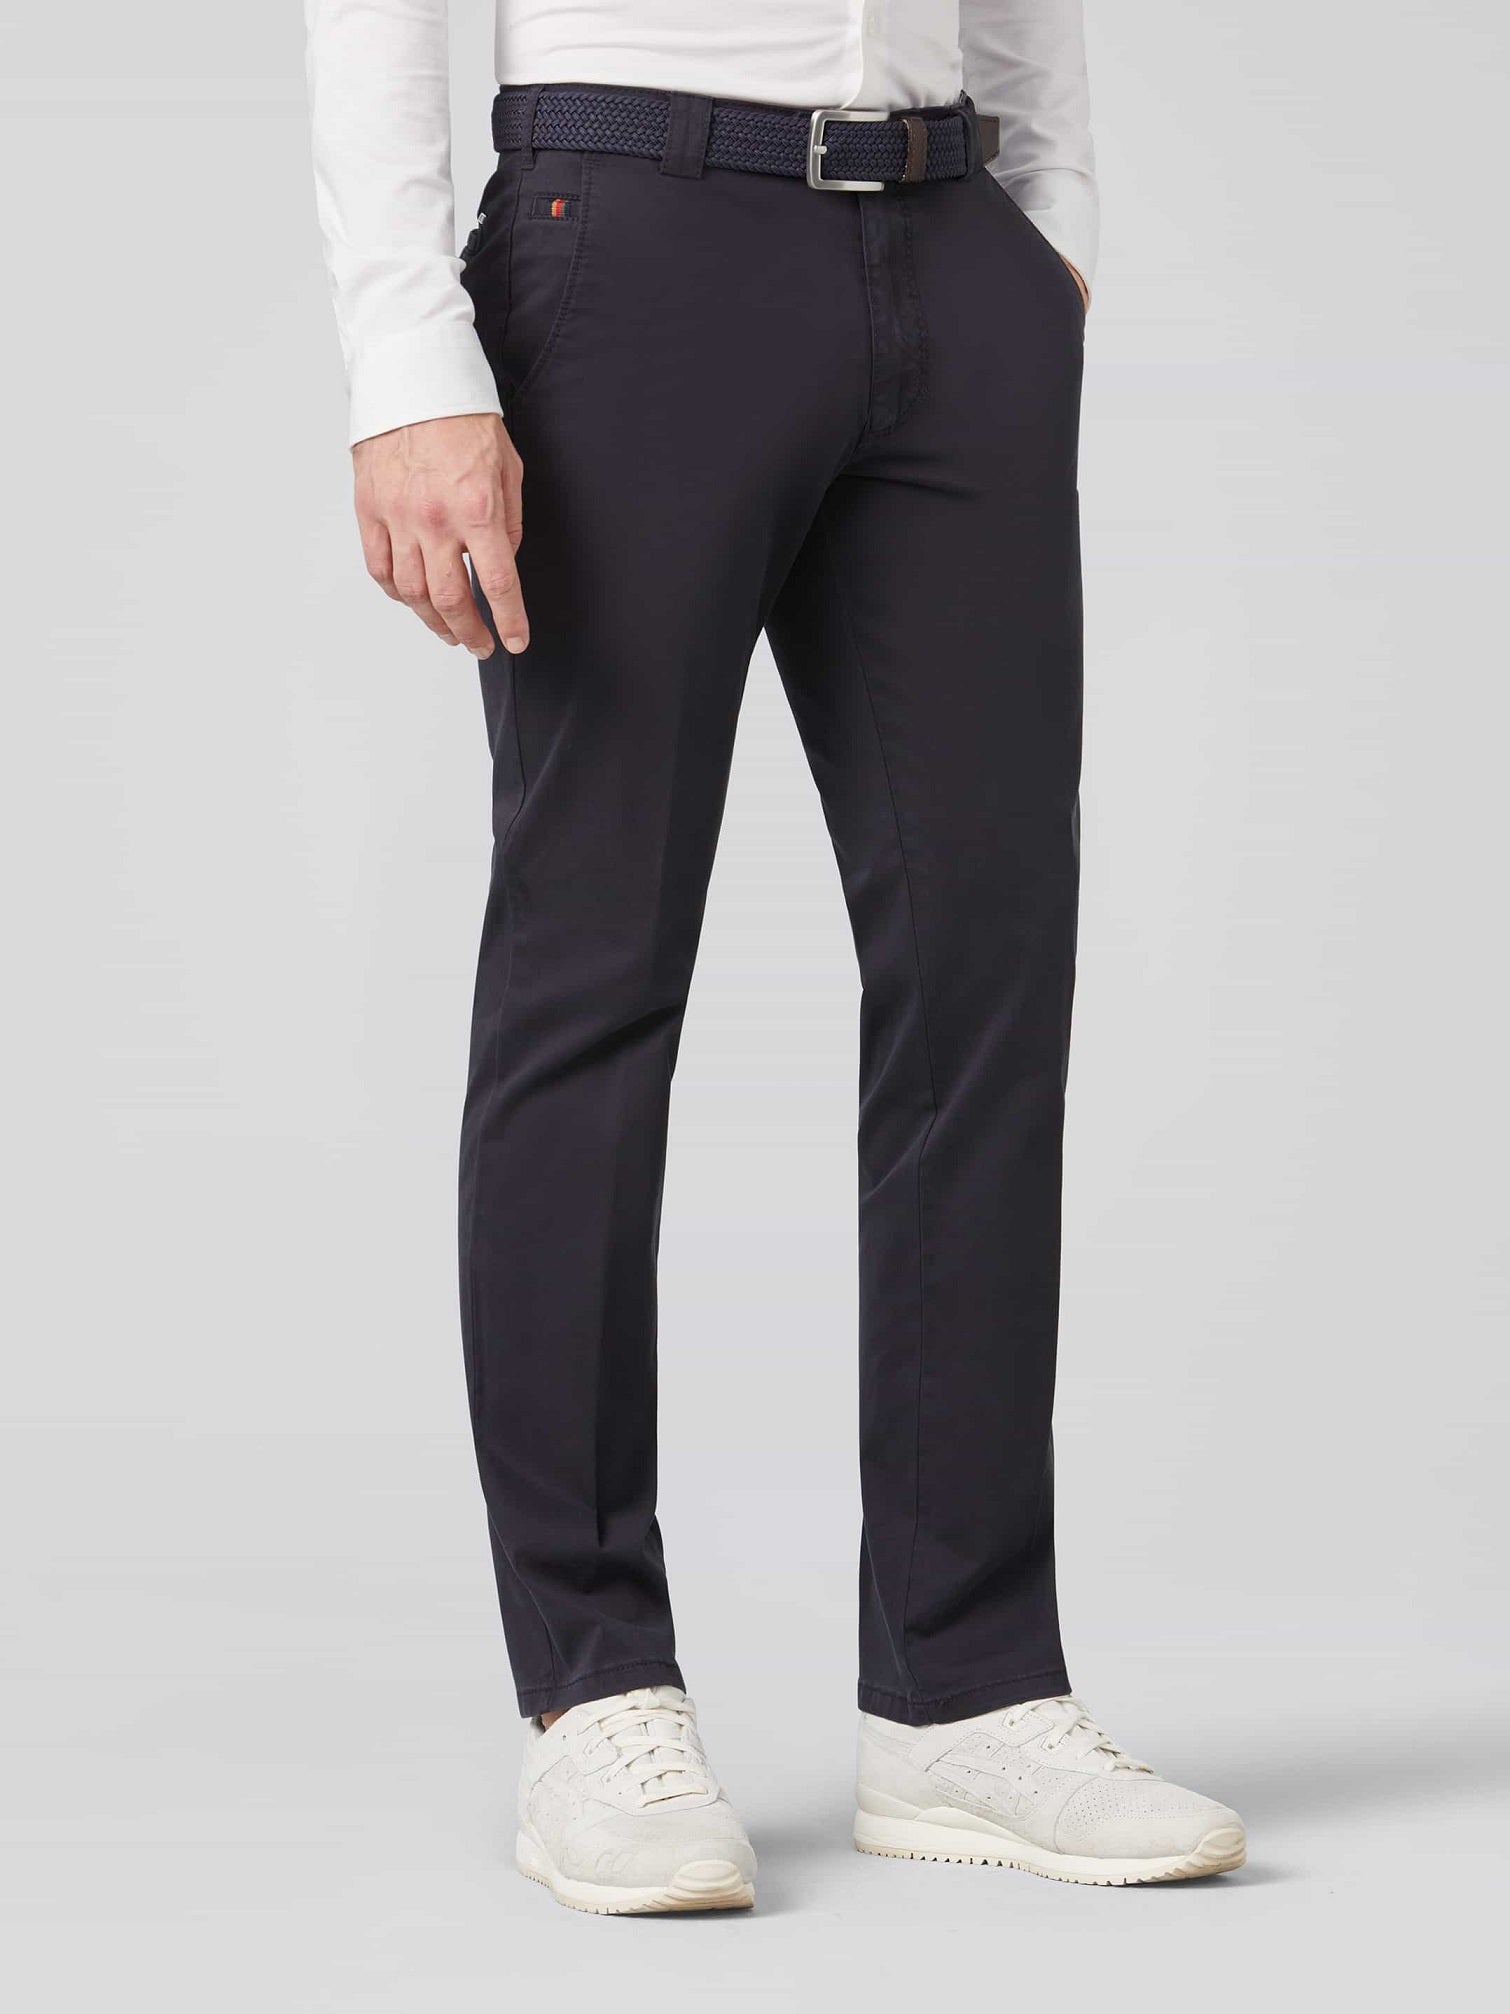 MEYER Roma Trousers - 3001 Light-Weight Cotton Chinos - Navy